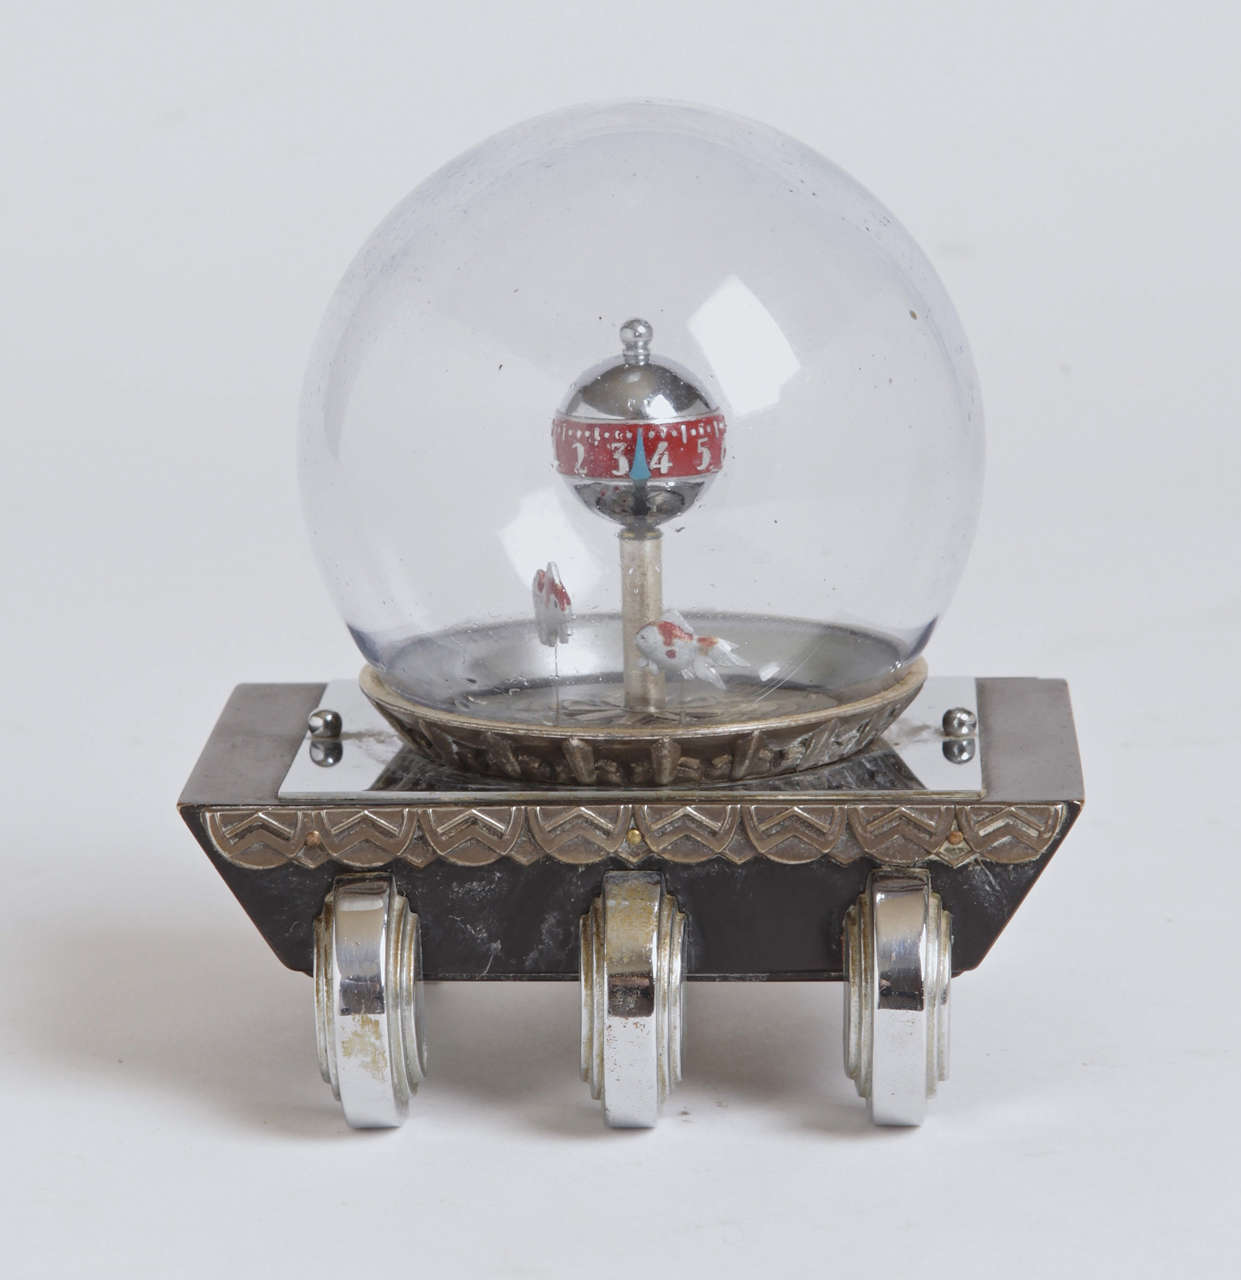 Very cool early 30's design, with a revolving enameled chrome ball inside a removable glass dome indicating hours and minutes.  One rotating fish marks the seconds, while the second fish oscillates as part of the movement.  Nice deco trim frieze and